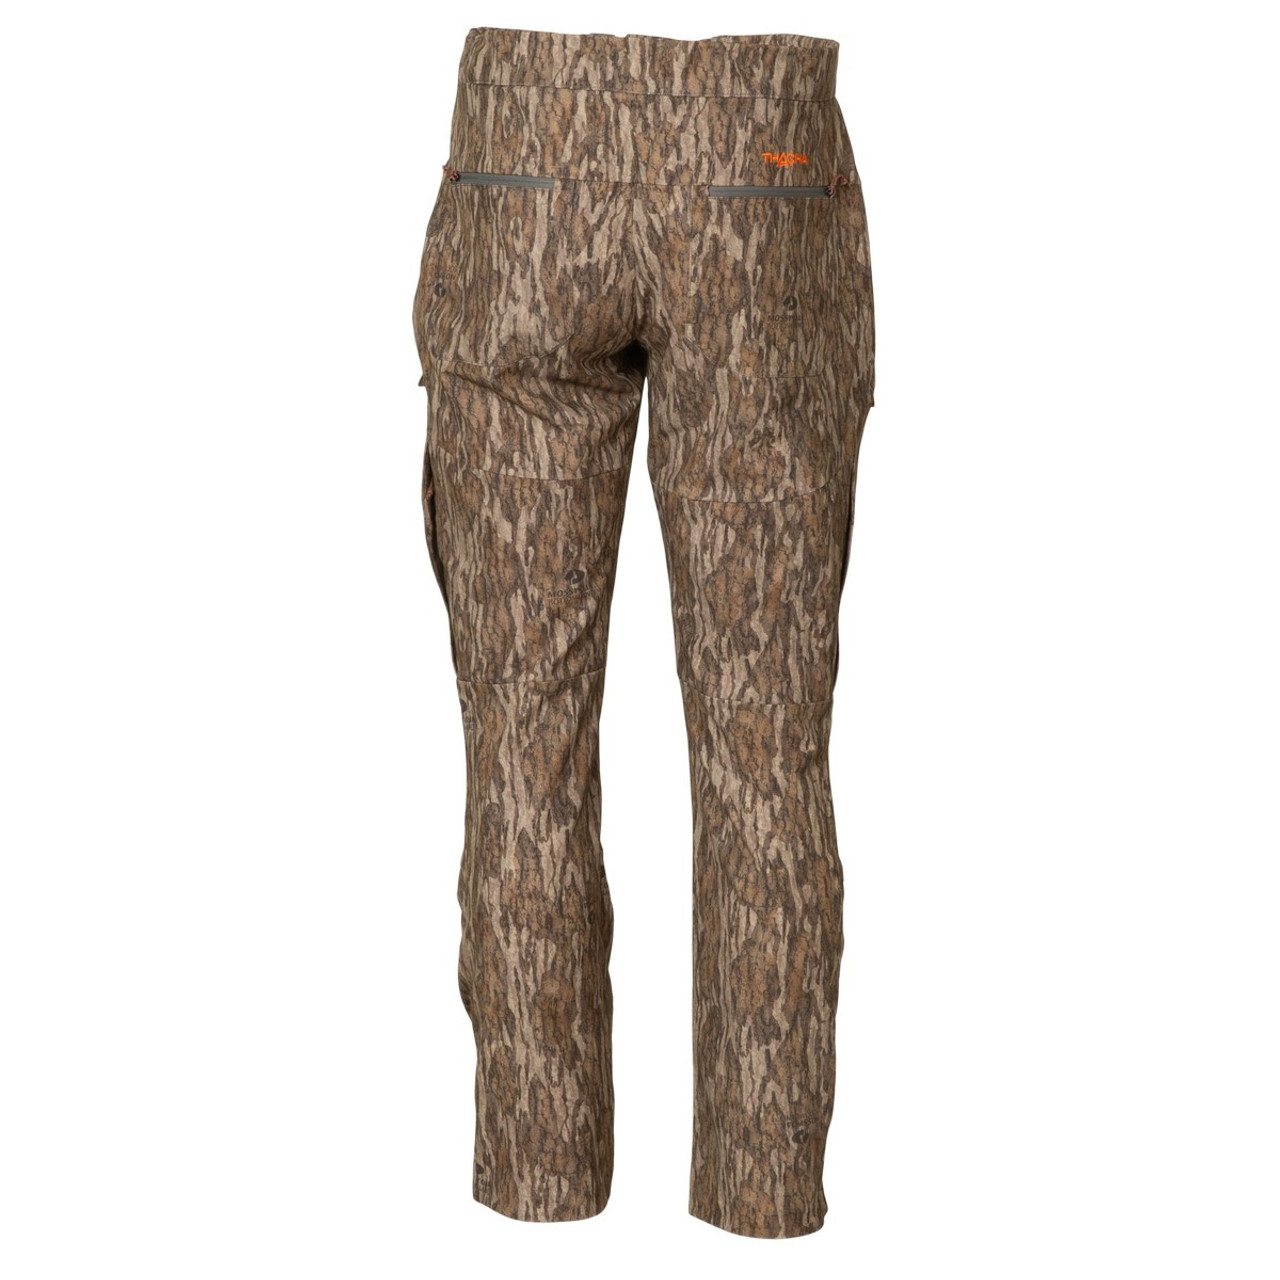 Banded Thacha L-1 Light Weight Pant - Bottomland - 32x32 - MP0001-BL-3232